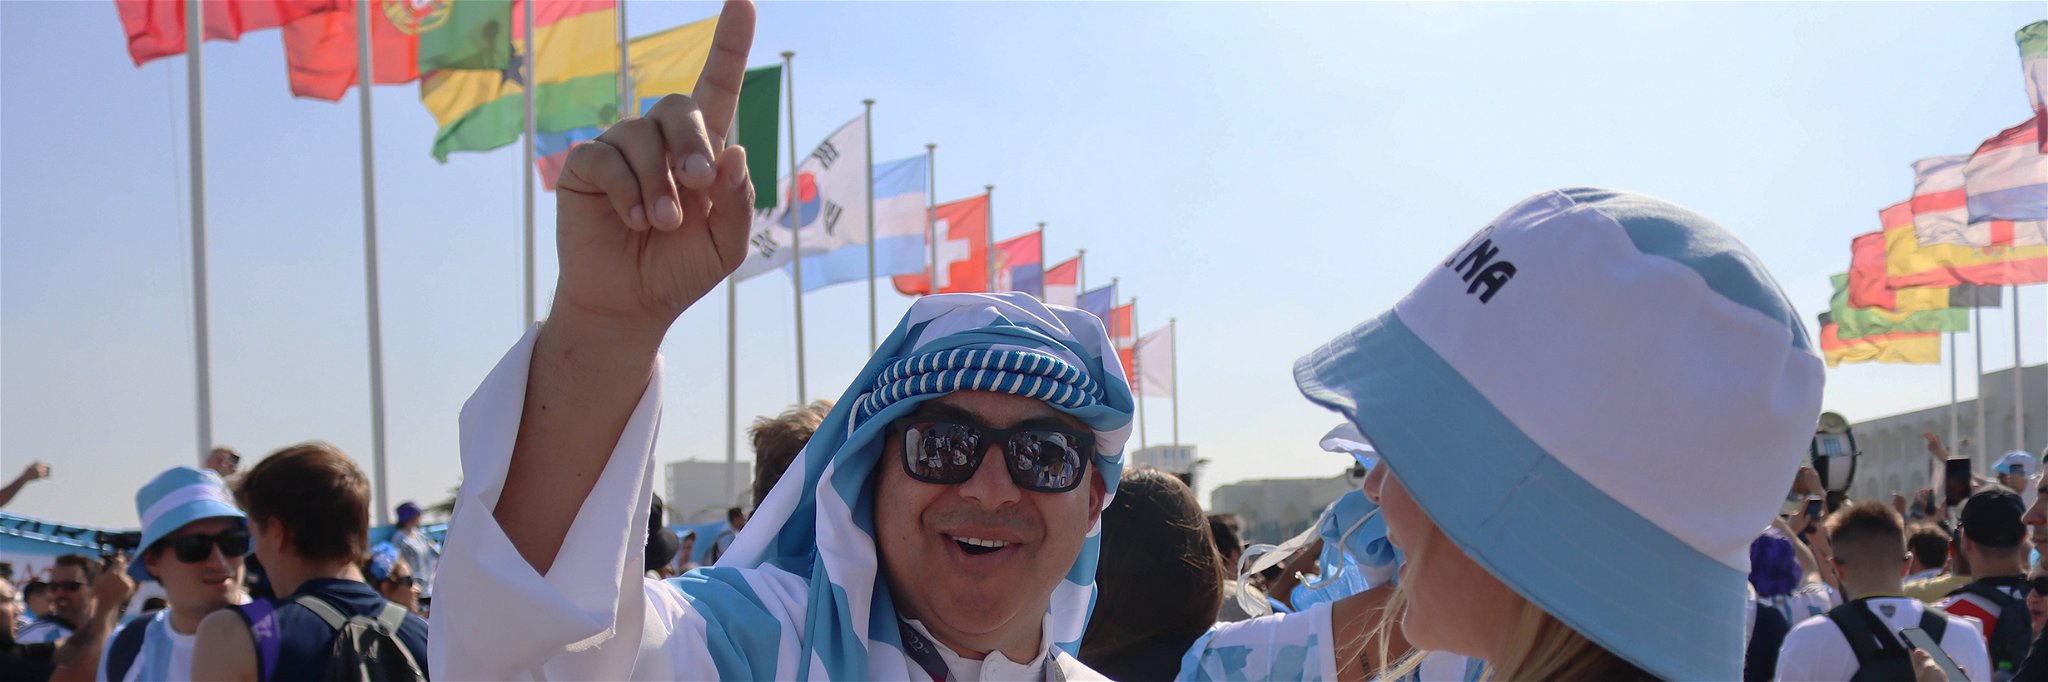 More than 1.4million visited Qatar during the World Cup.